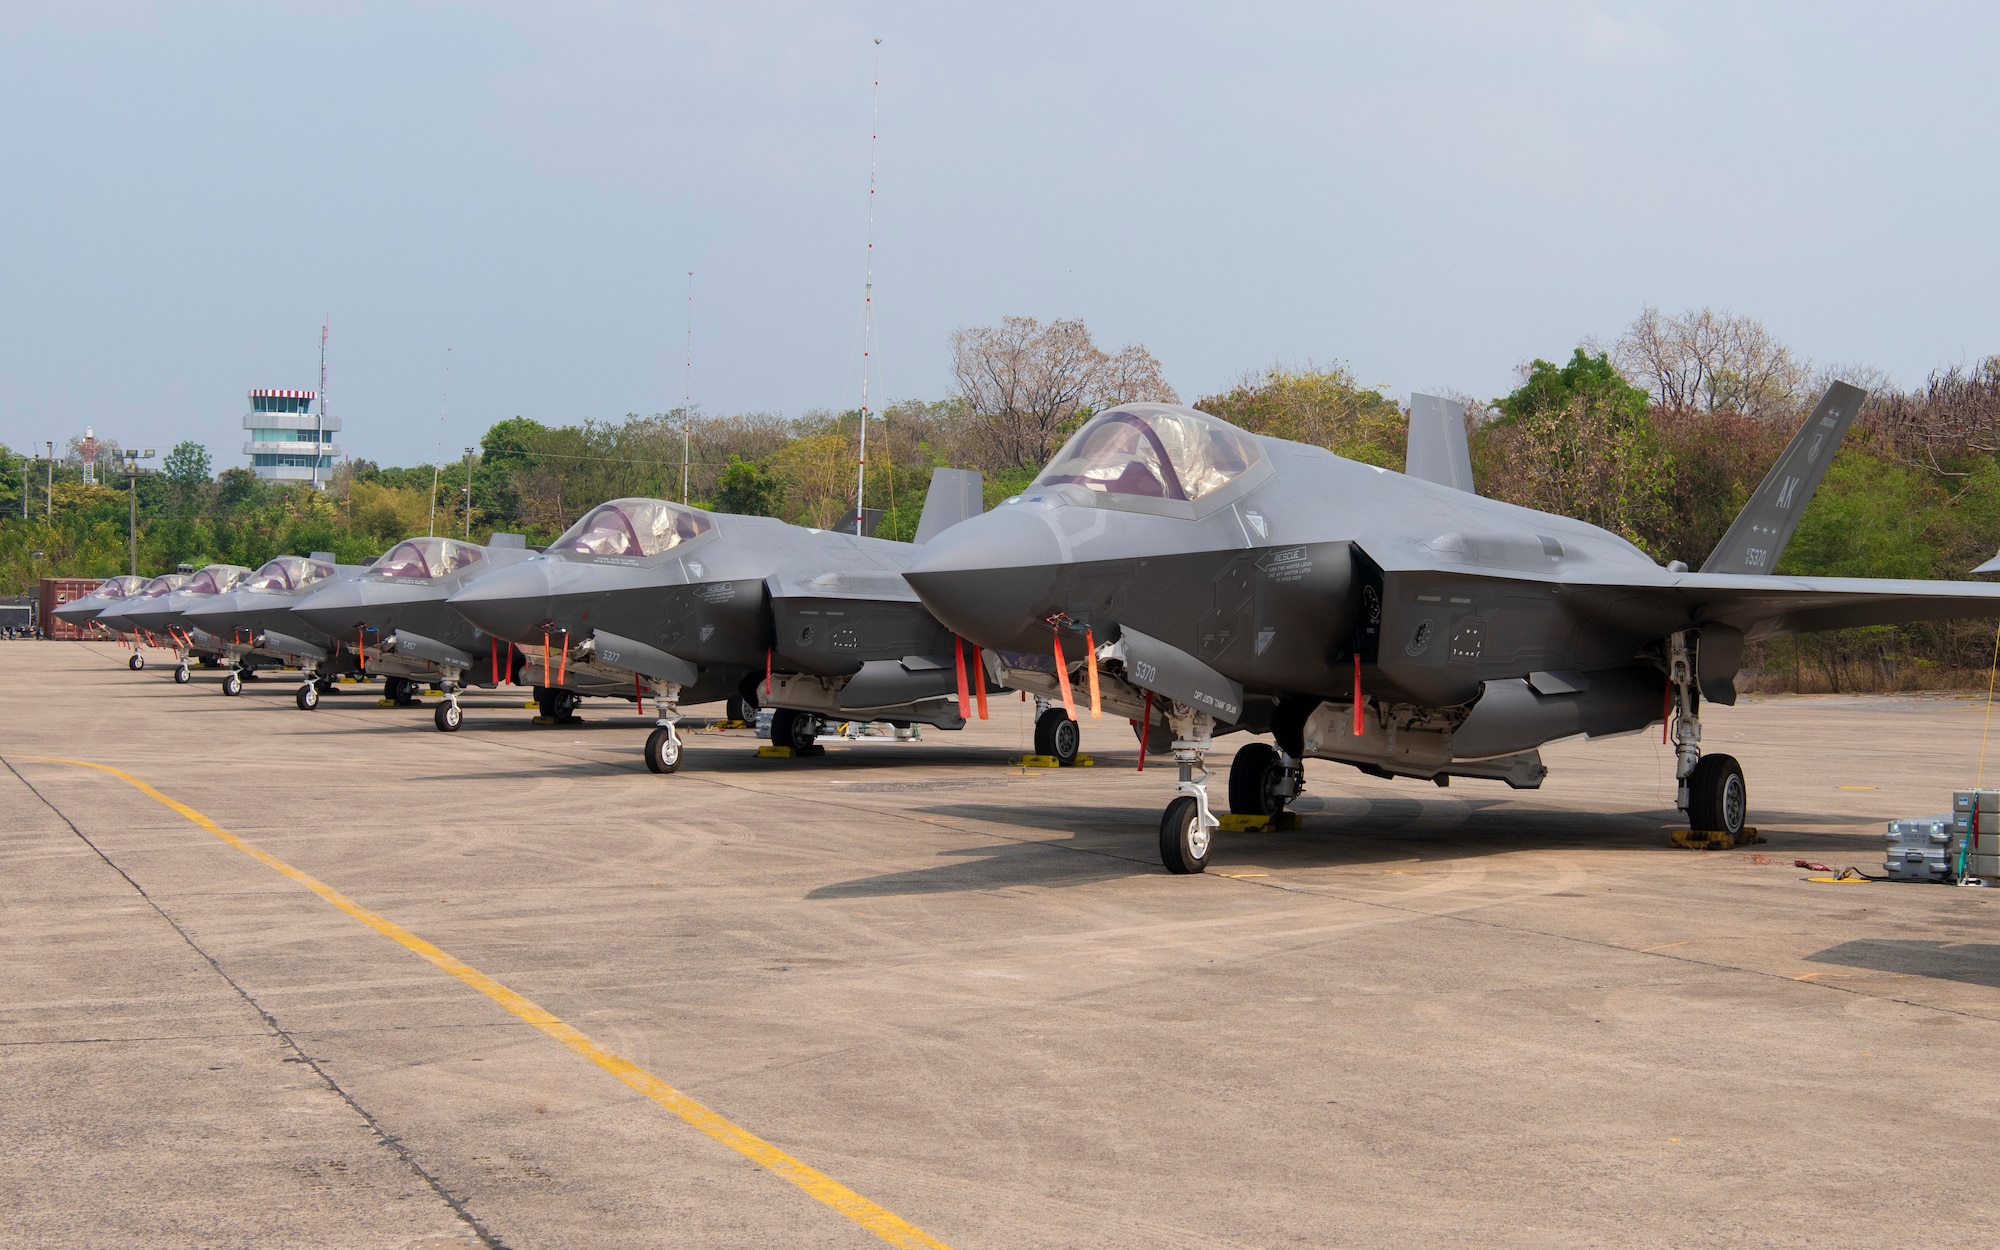 F-35A Lightning II’s assigned to the 354th Fighter Wing, Eielson Air Force Base, Alaska, sit on a runway prior to Exercise Cope Tiger 2024 at Korat Royal Thai Air Force Base, Thailand, March 7, 2024. This marks the first time in its 28th iteration of the exercise that 5th generation aircrafts are used in the Cope Tiger exercise. Units from the United States, Kingdom of Thailand and the Republic of Singapore Air Force have partnered together in this trilateral training to address regional security threats, humanitarian crises, and natural disasters. (U.S. Air Force Senior Airman Joao Marcus Costa)